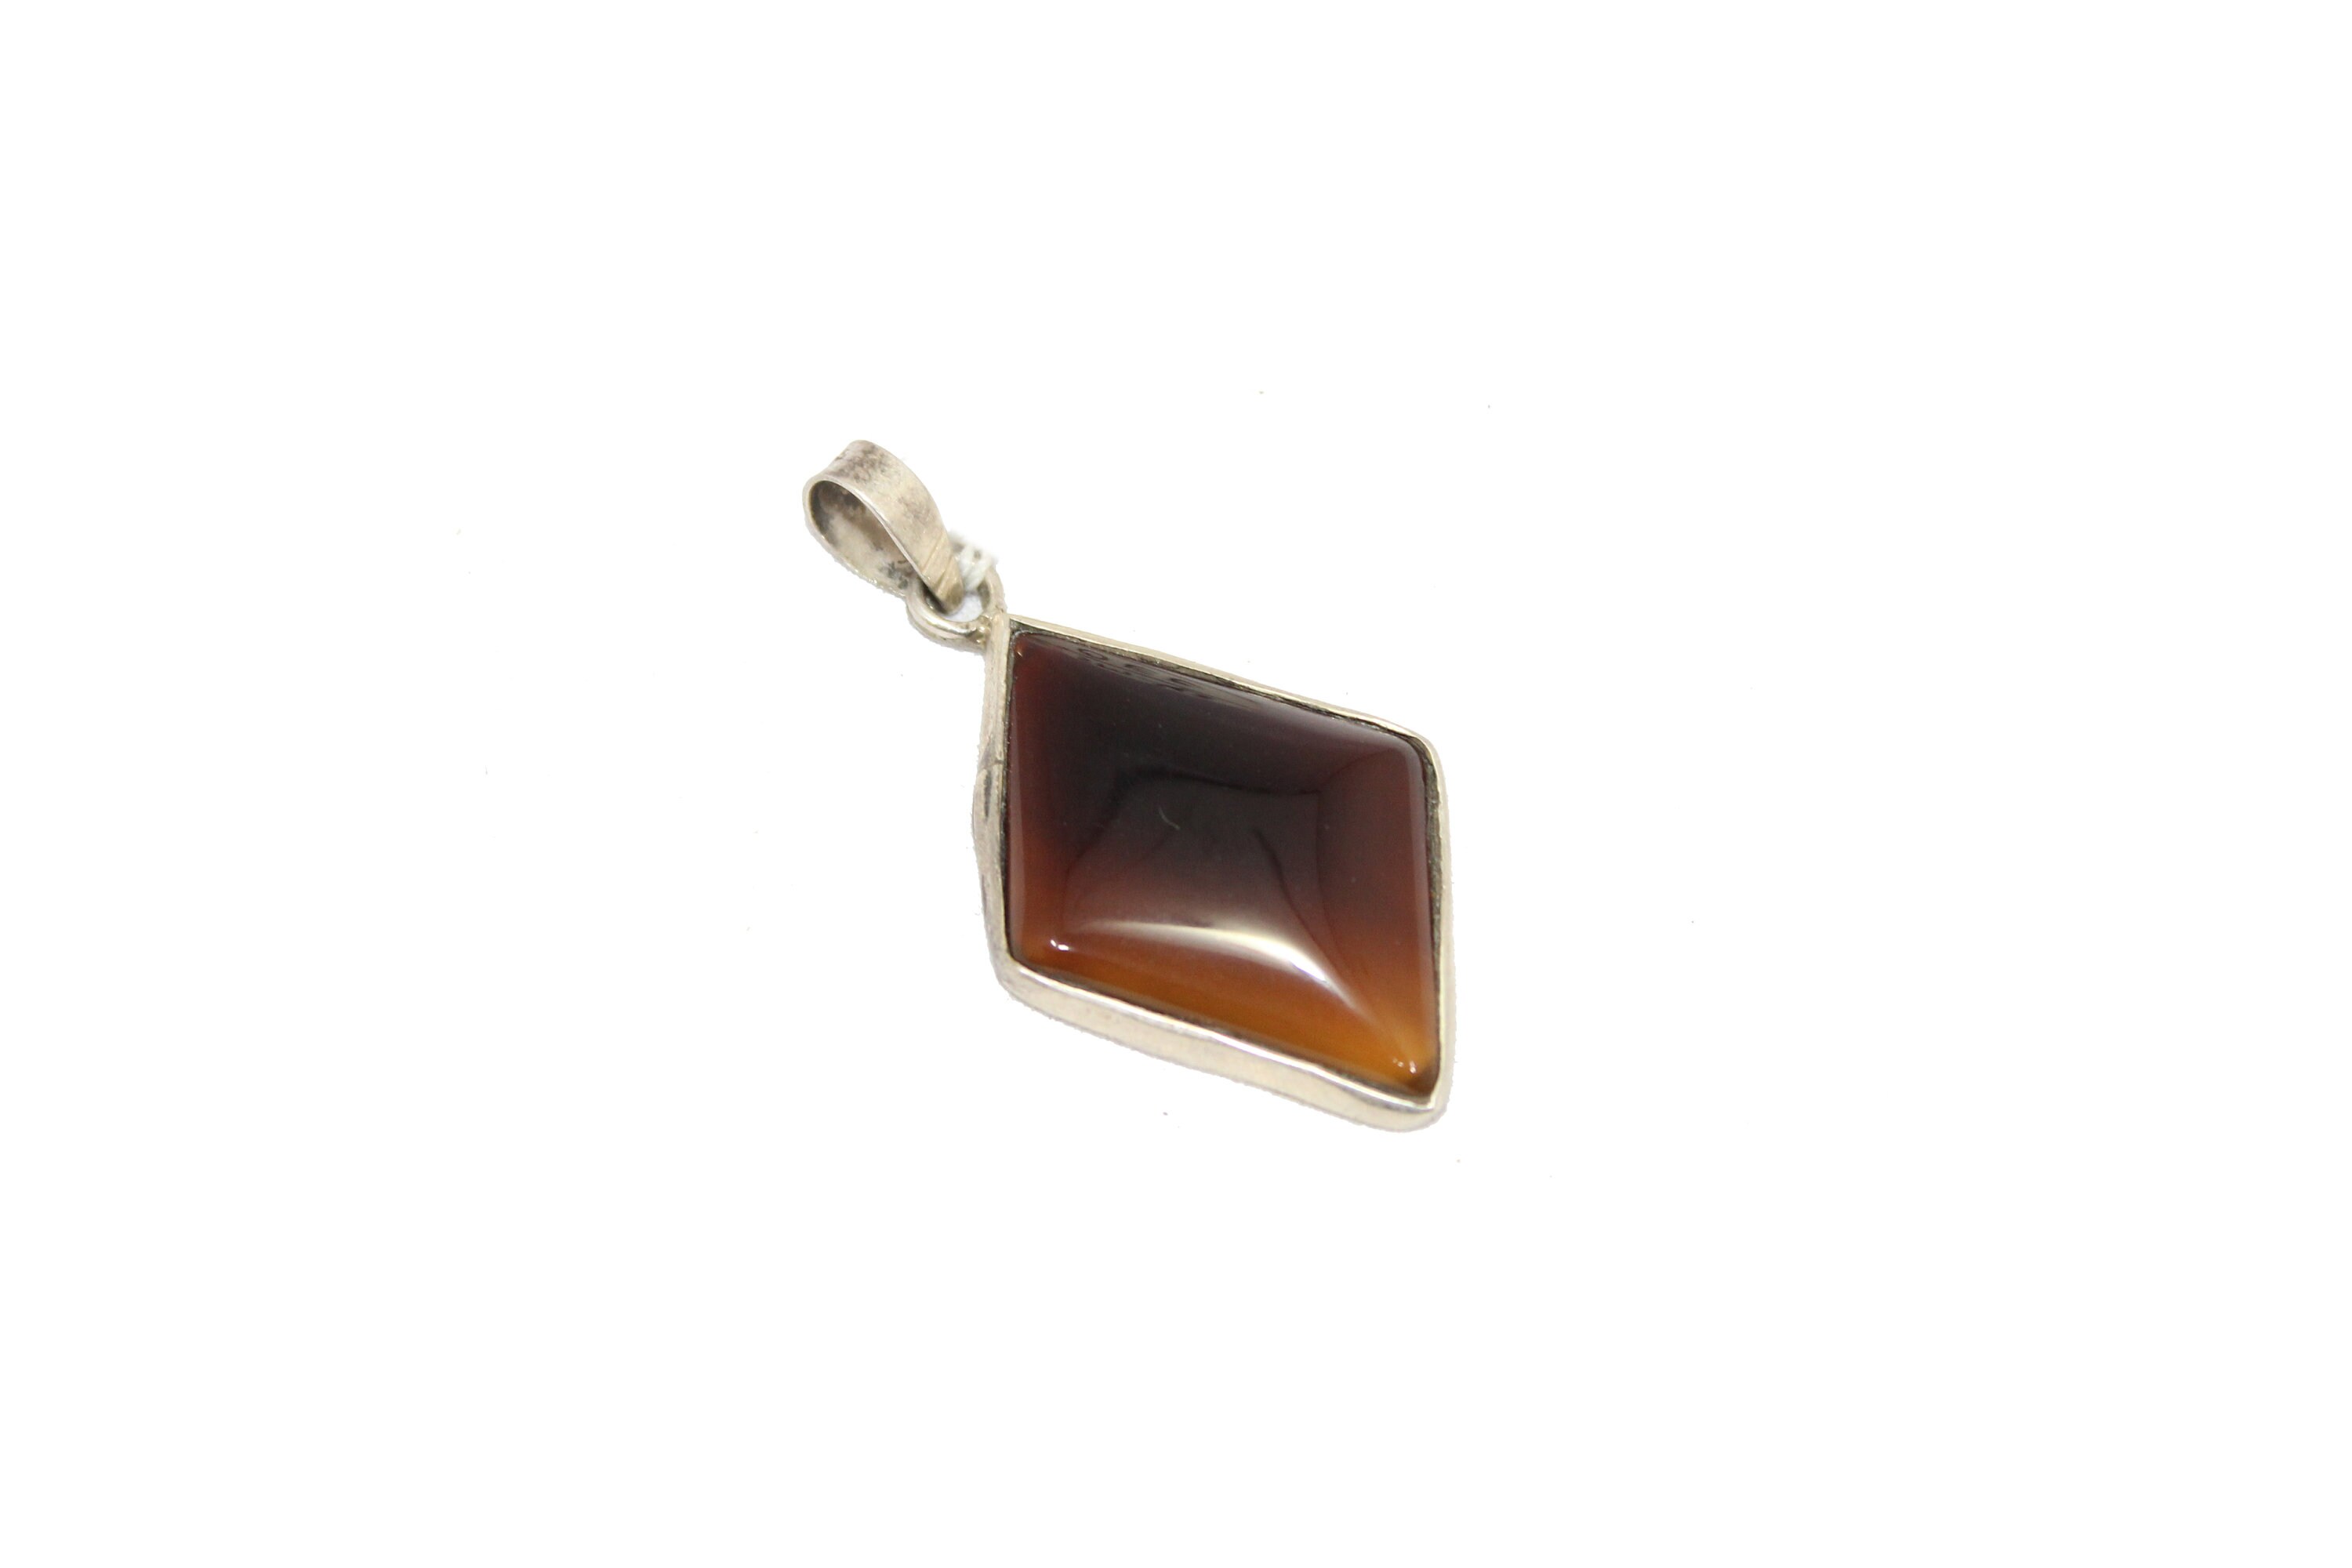 Rajasthan Gems Women 925 Sterling Silver Pendant Natural grey brown agate gem stone A 48